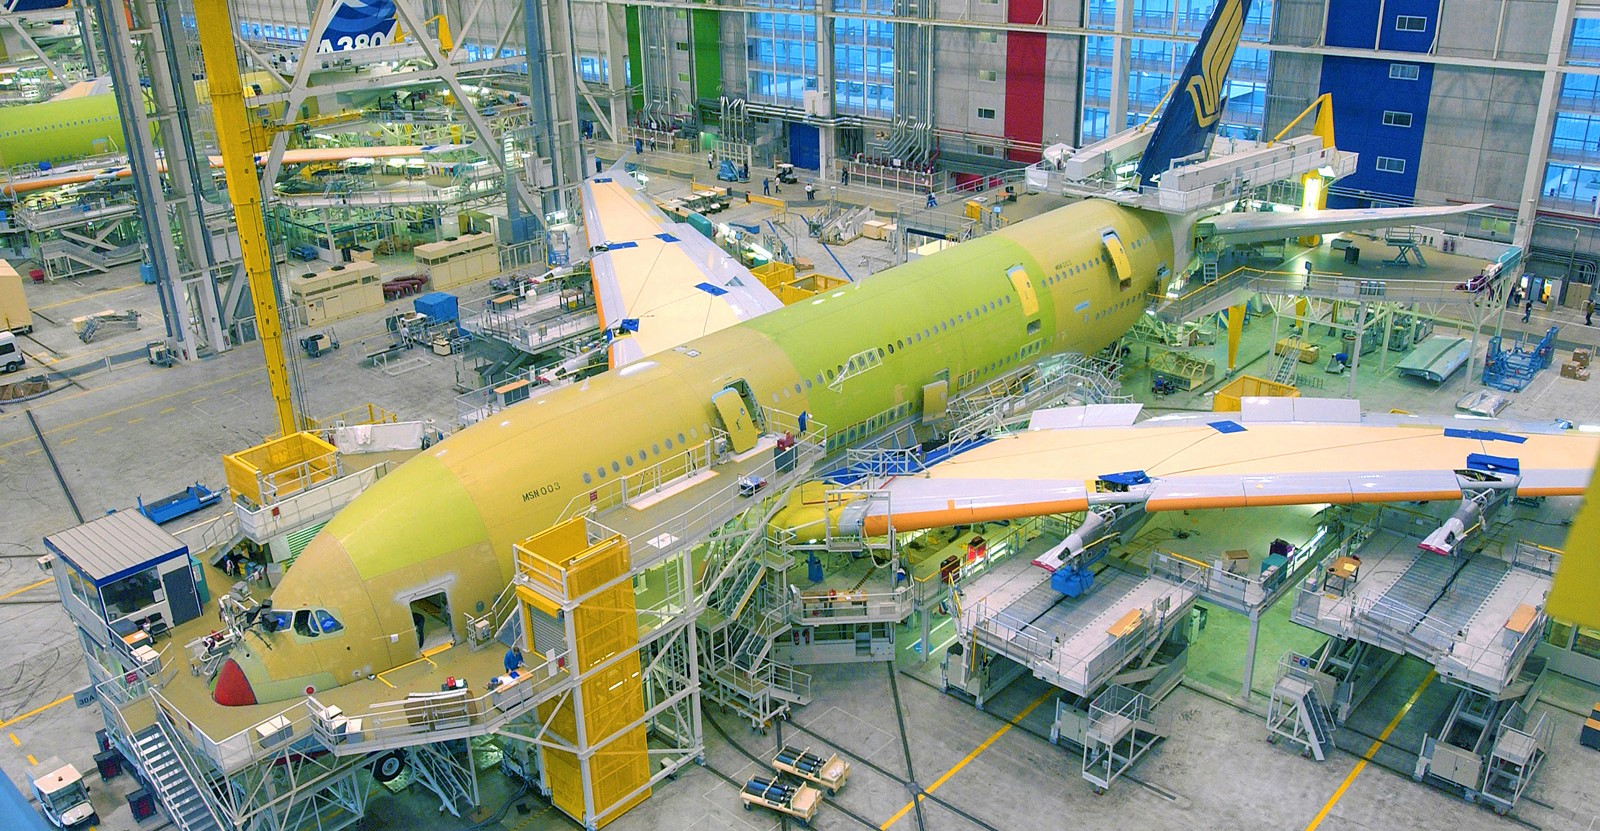 Airbus A380  Lagardère  facility  in  Toulouse  will  be  converted  to  A321 final  assembly line  (FAL)  by the end of 2022.